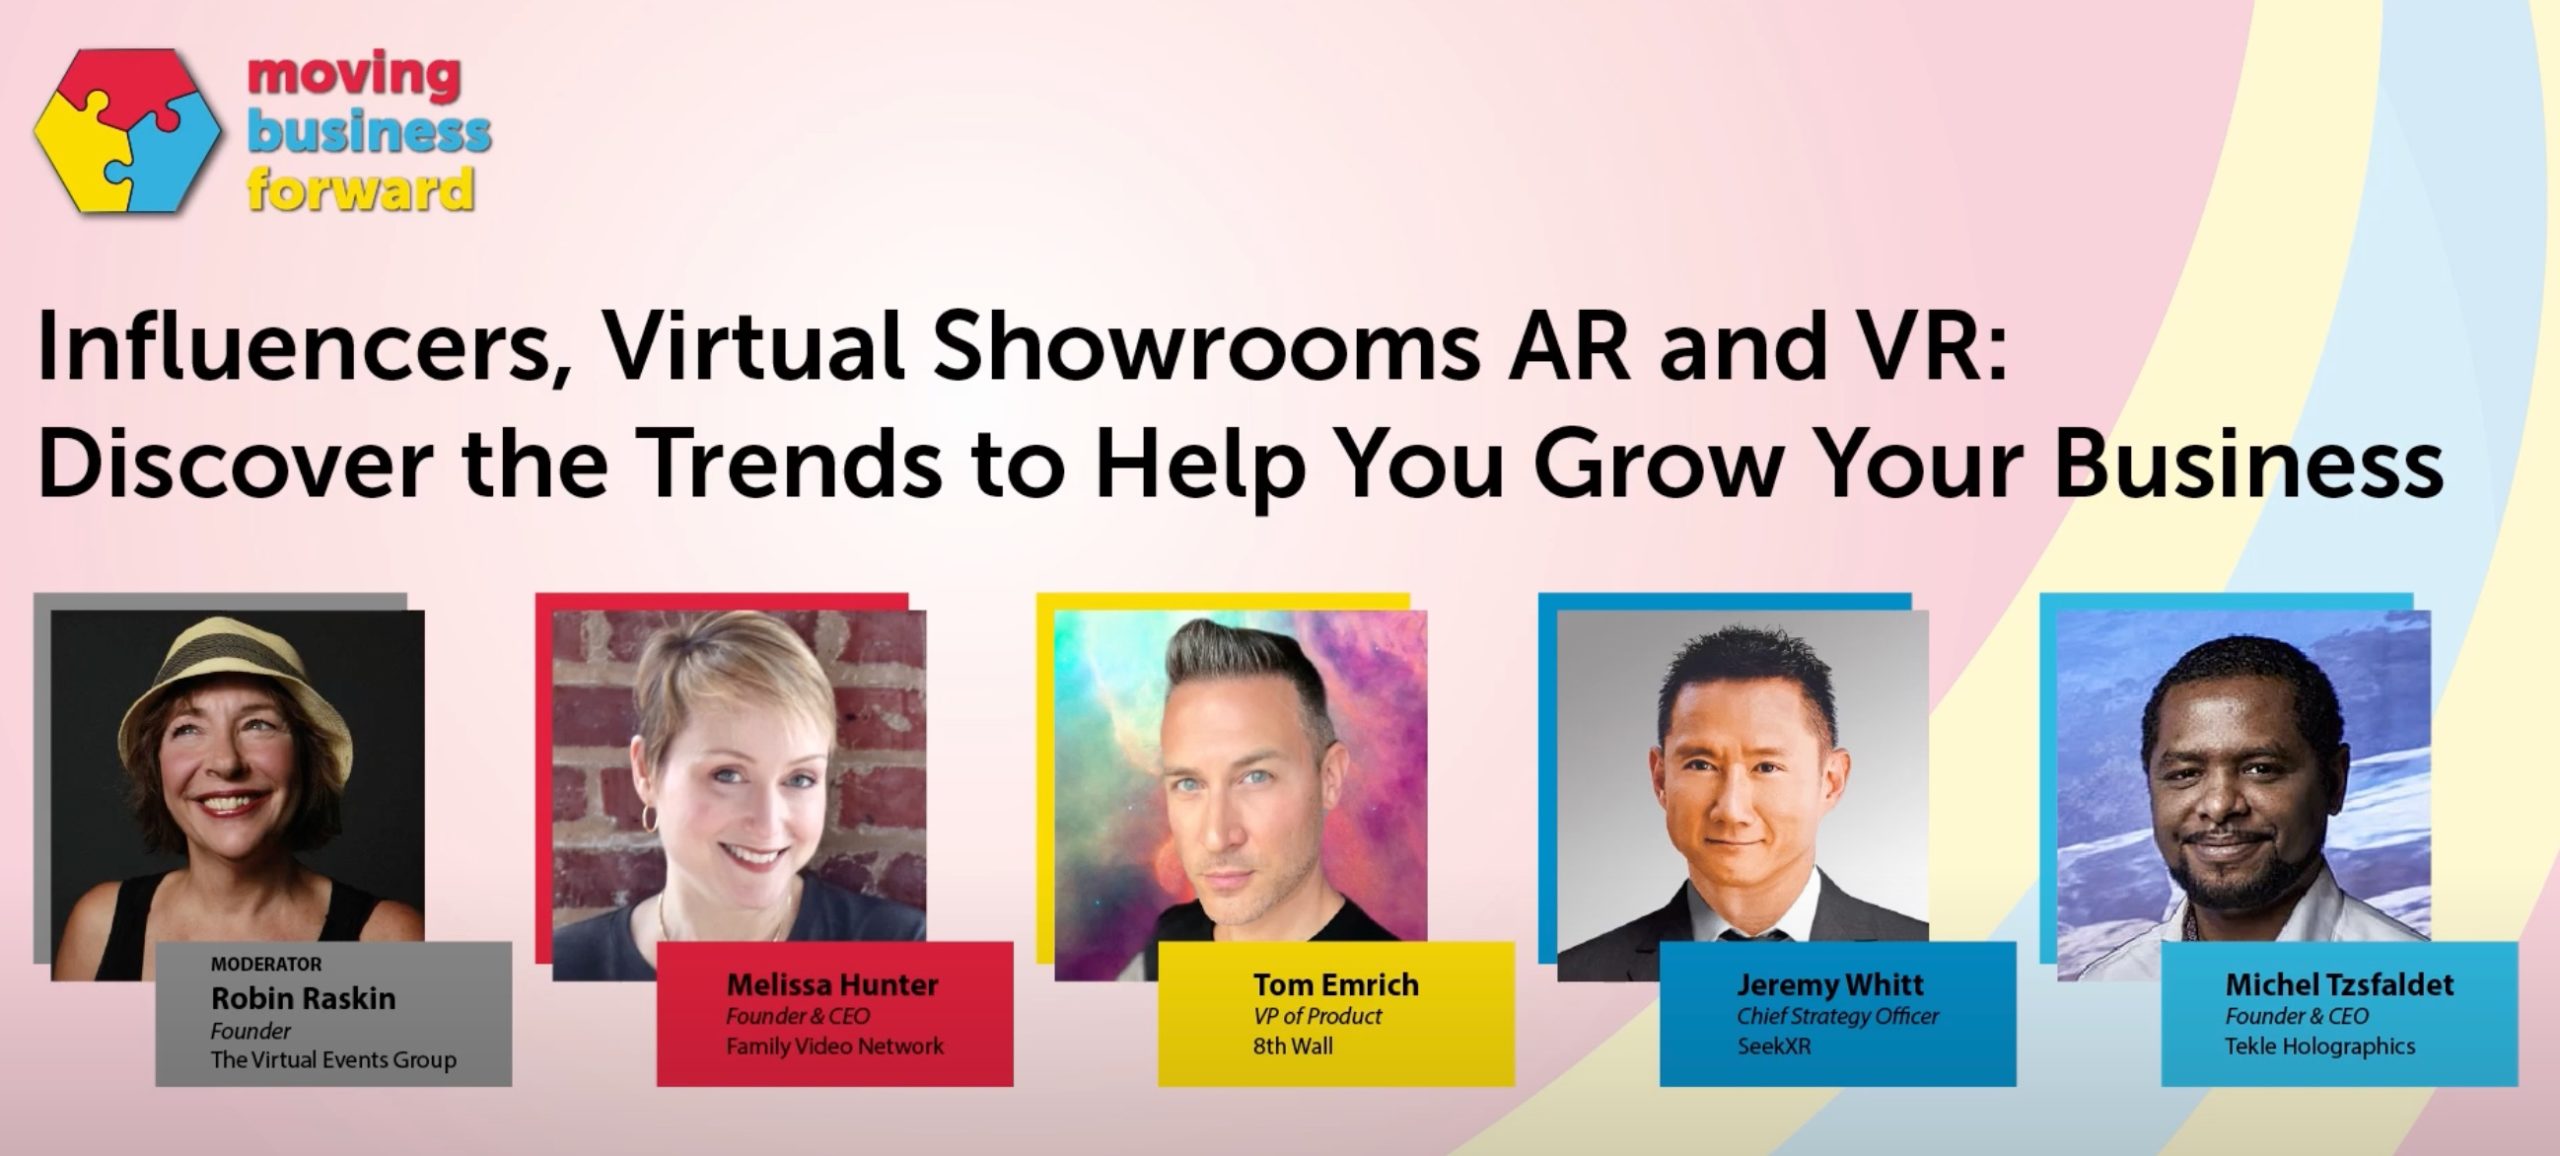 How Augmented Reality and Other Technology Trends Can Help Your Business - SeekXR